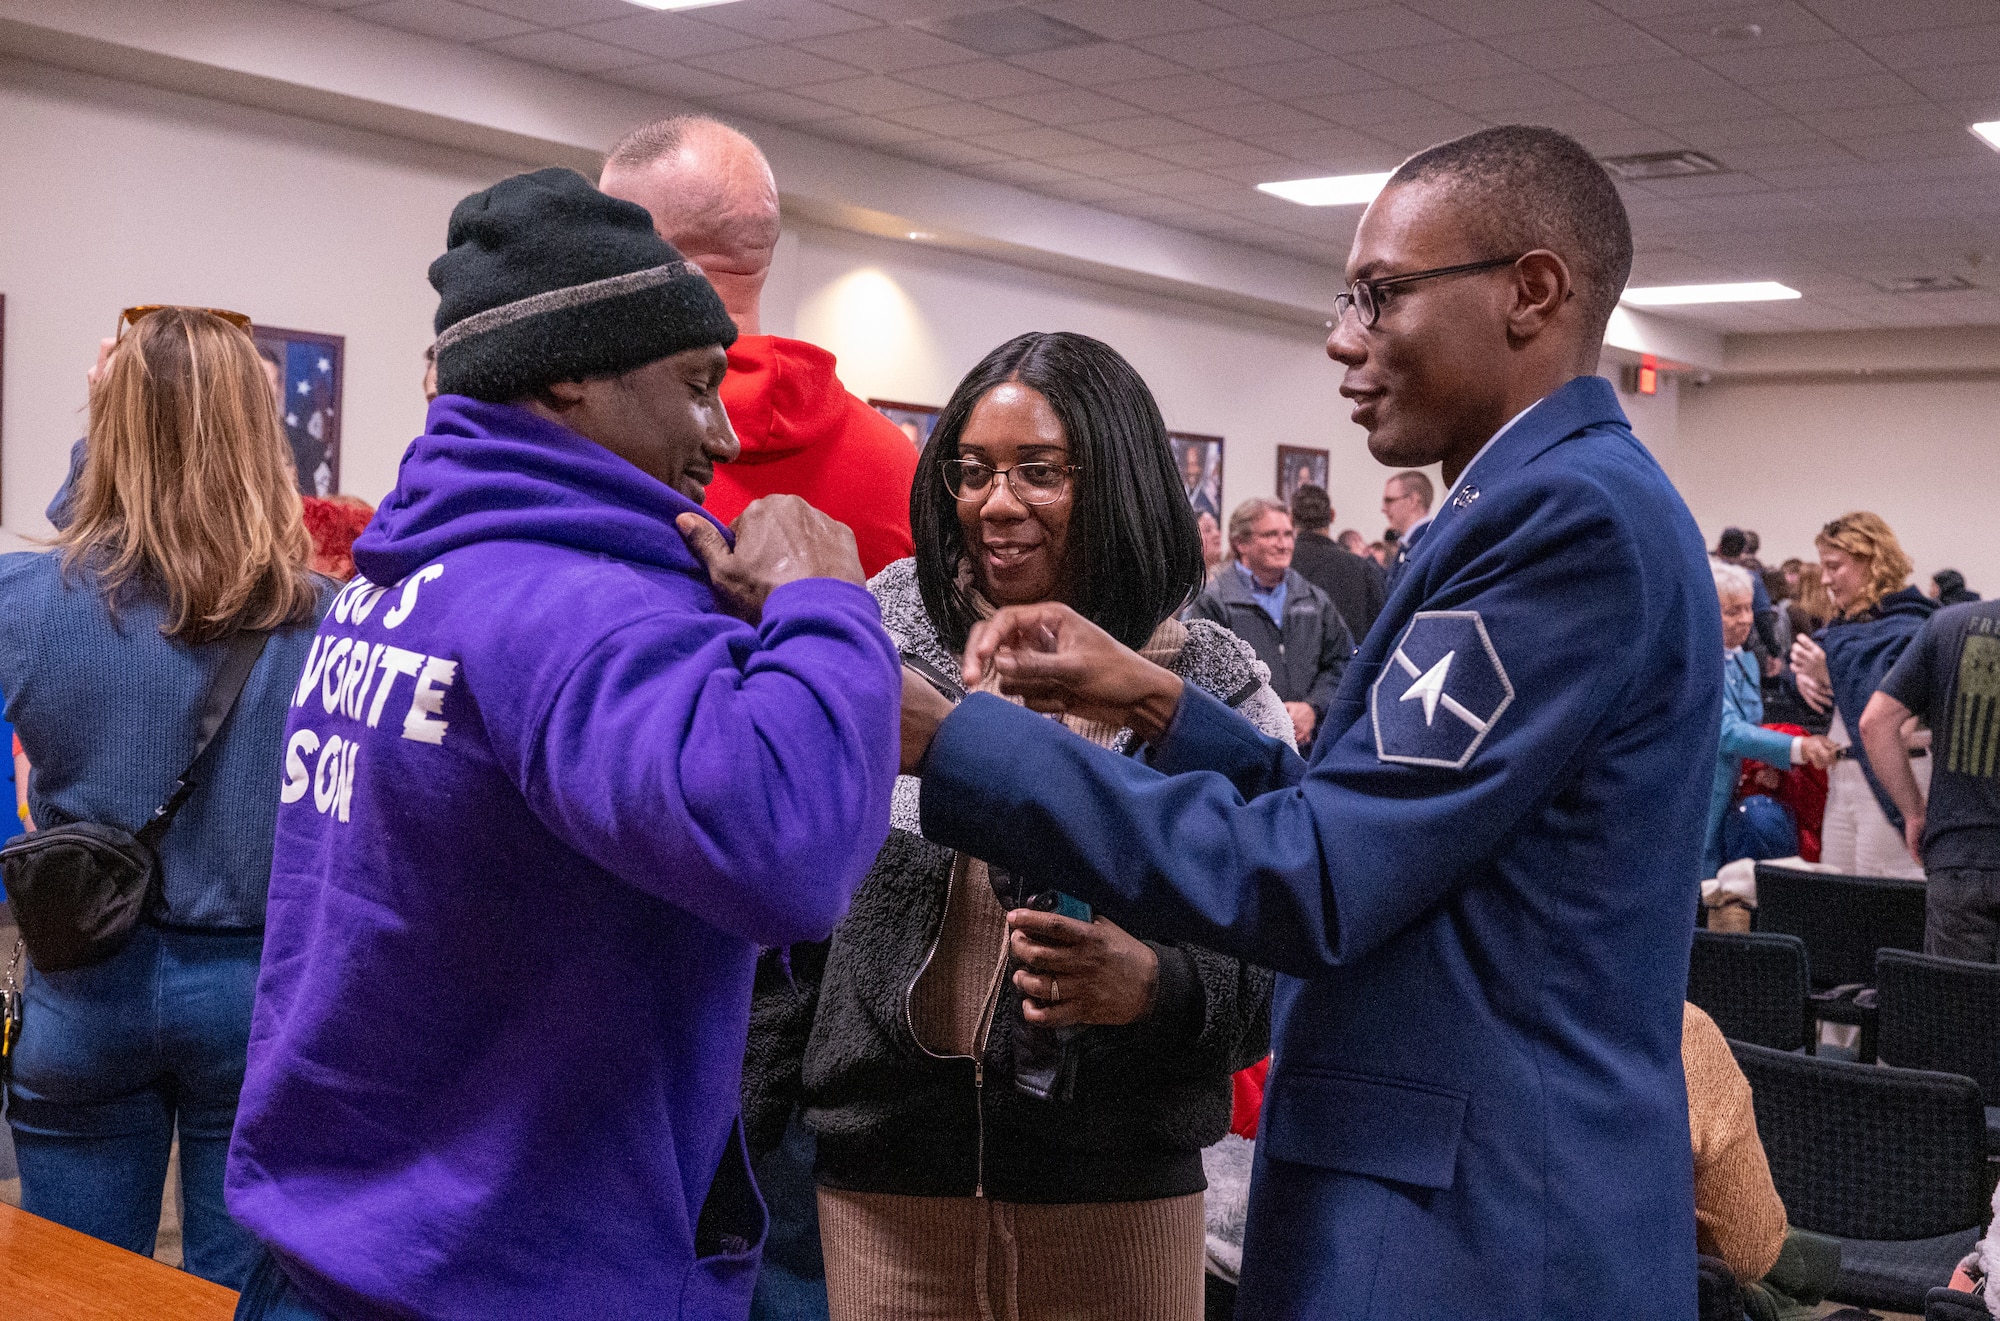 A newly graduated U.S. Space Force Guardian presents the U.S. Space Force Family lapel pin to a family member during a Basic Military Training graduation ceremony at Joint Base San Antonio-Lackland, Texas, Dec. 27, 2023. In a move that celebrates both the service members and their families, graduating Guardians will now present the Delta-shaped U.S. Space Force Family lapel pins to their loved ones during graduation week. (U.S. Air Force photo by 2d Lt. Kate E. Anderson)